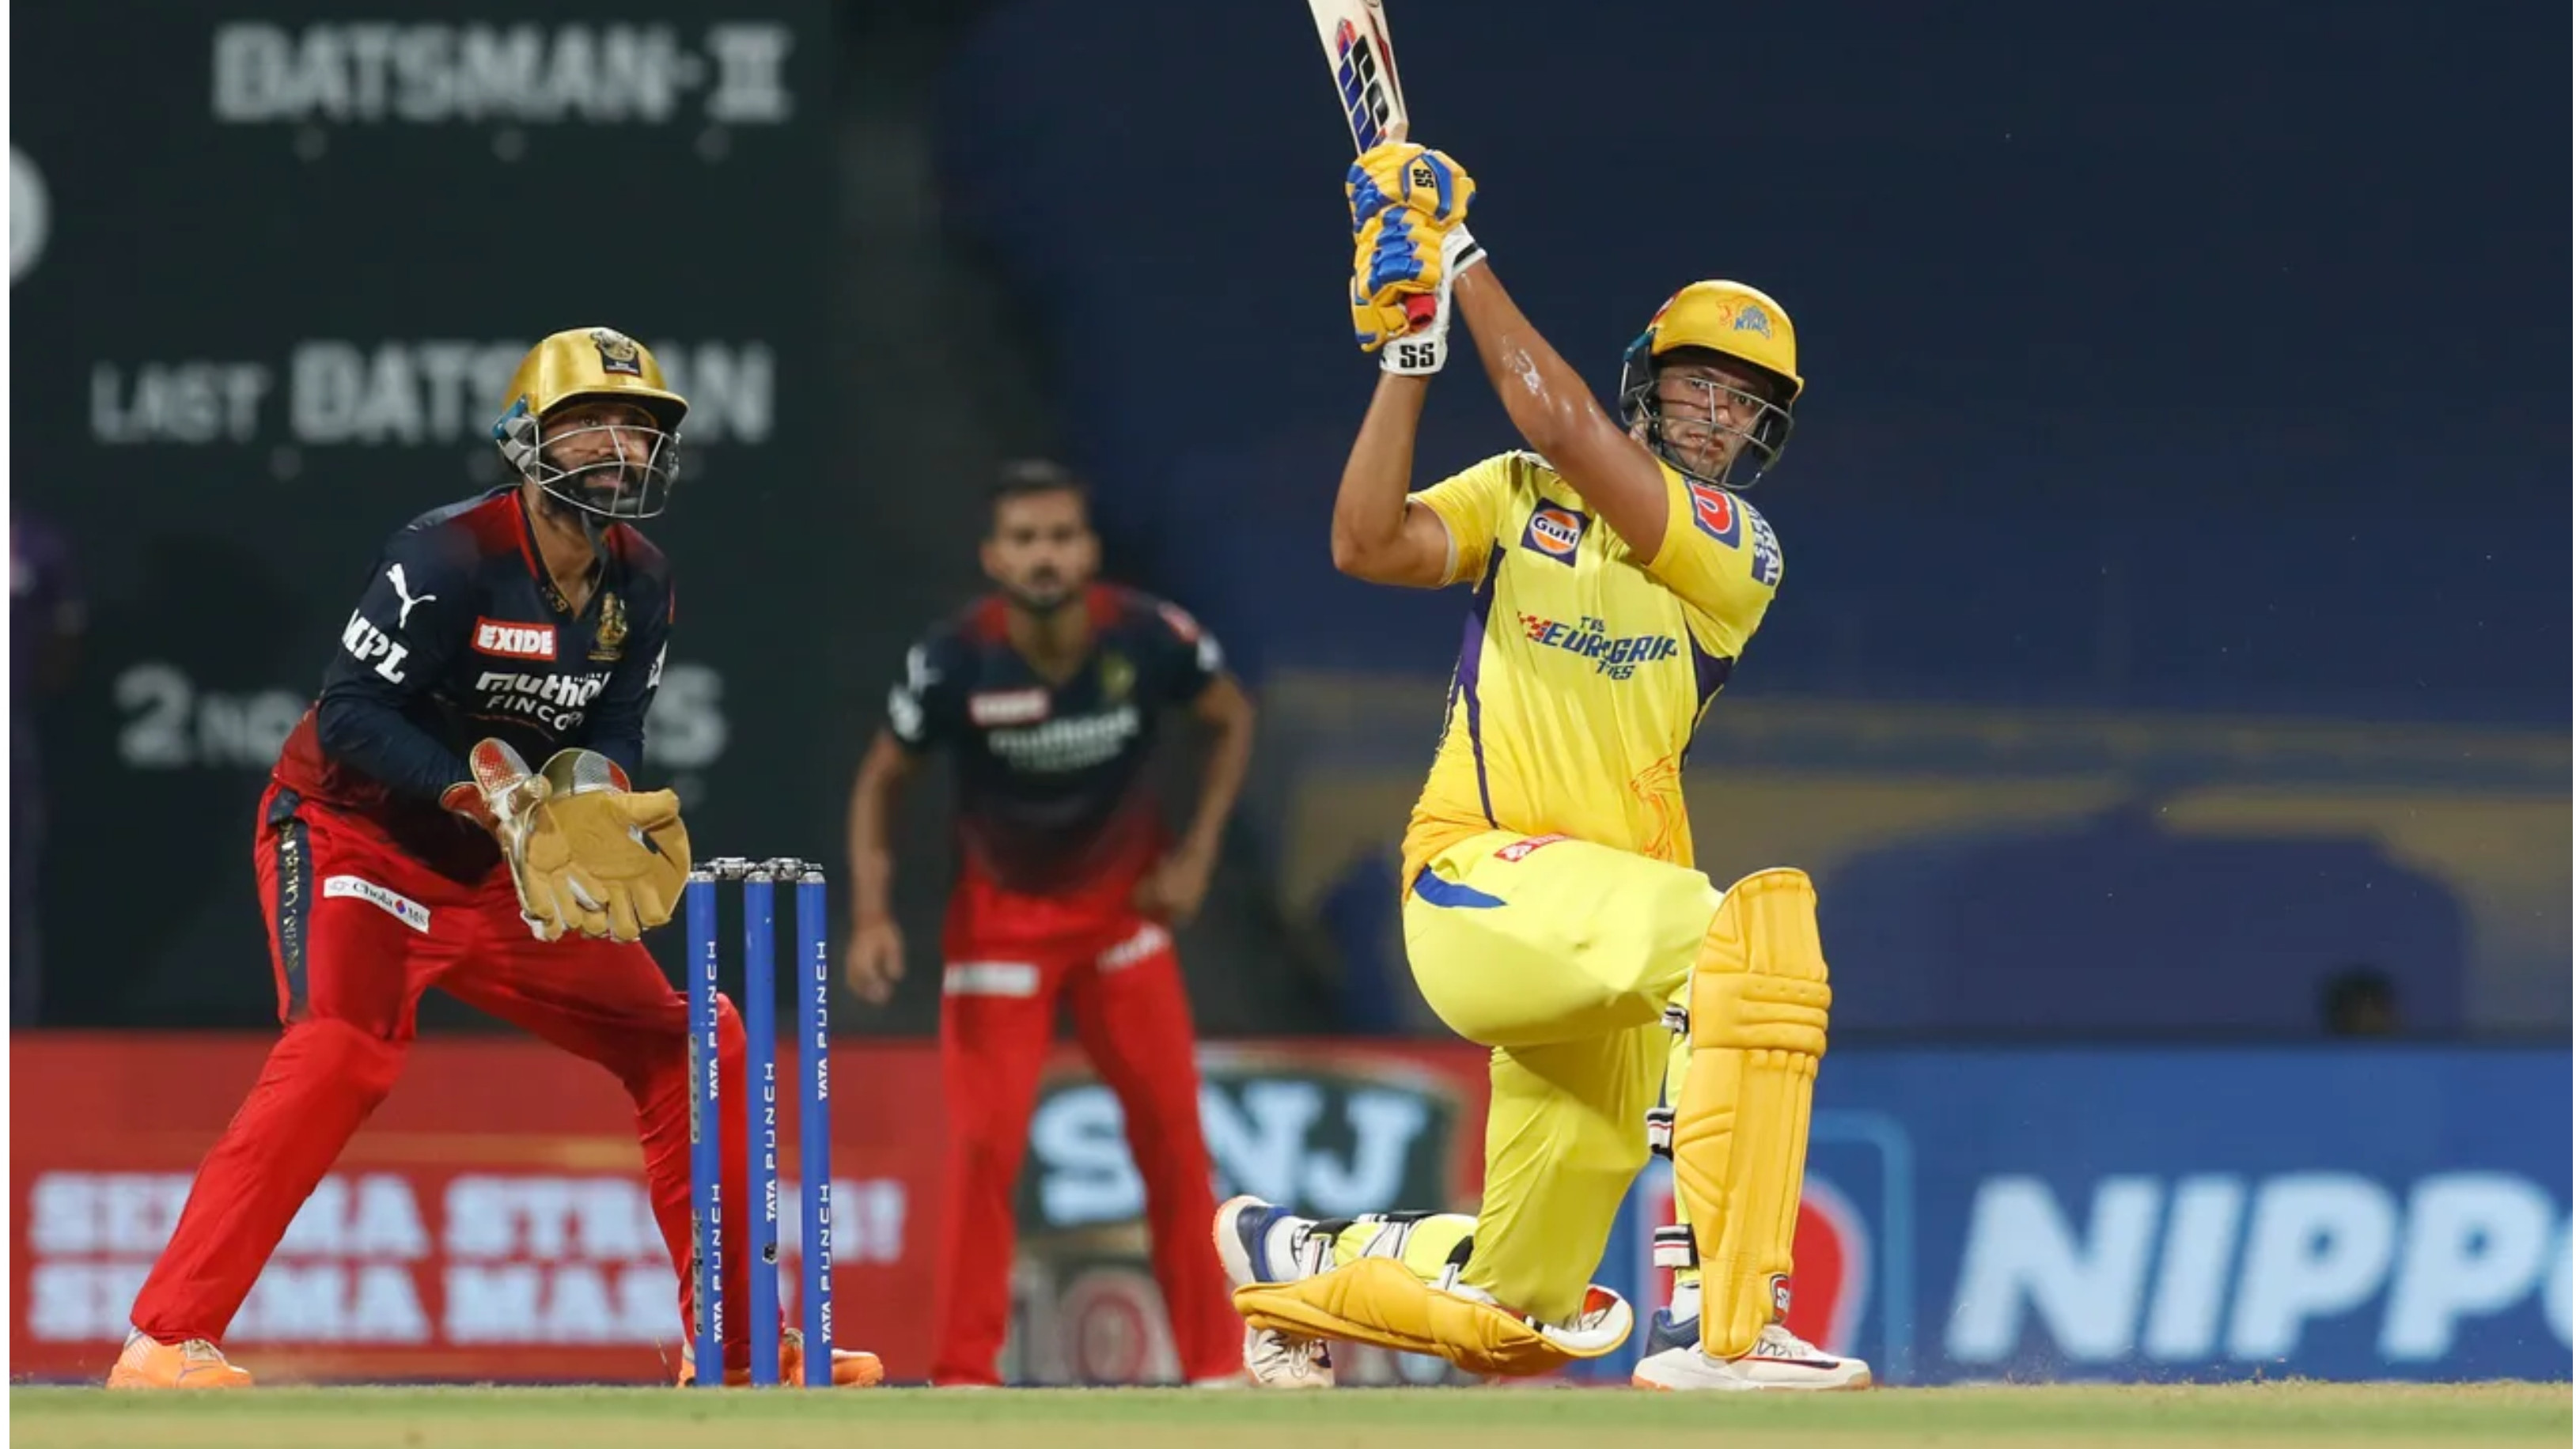 IPL 2022: Shivam Dube elated after finally being able to translate his domestic form into the IPL